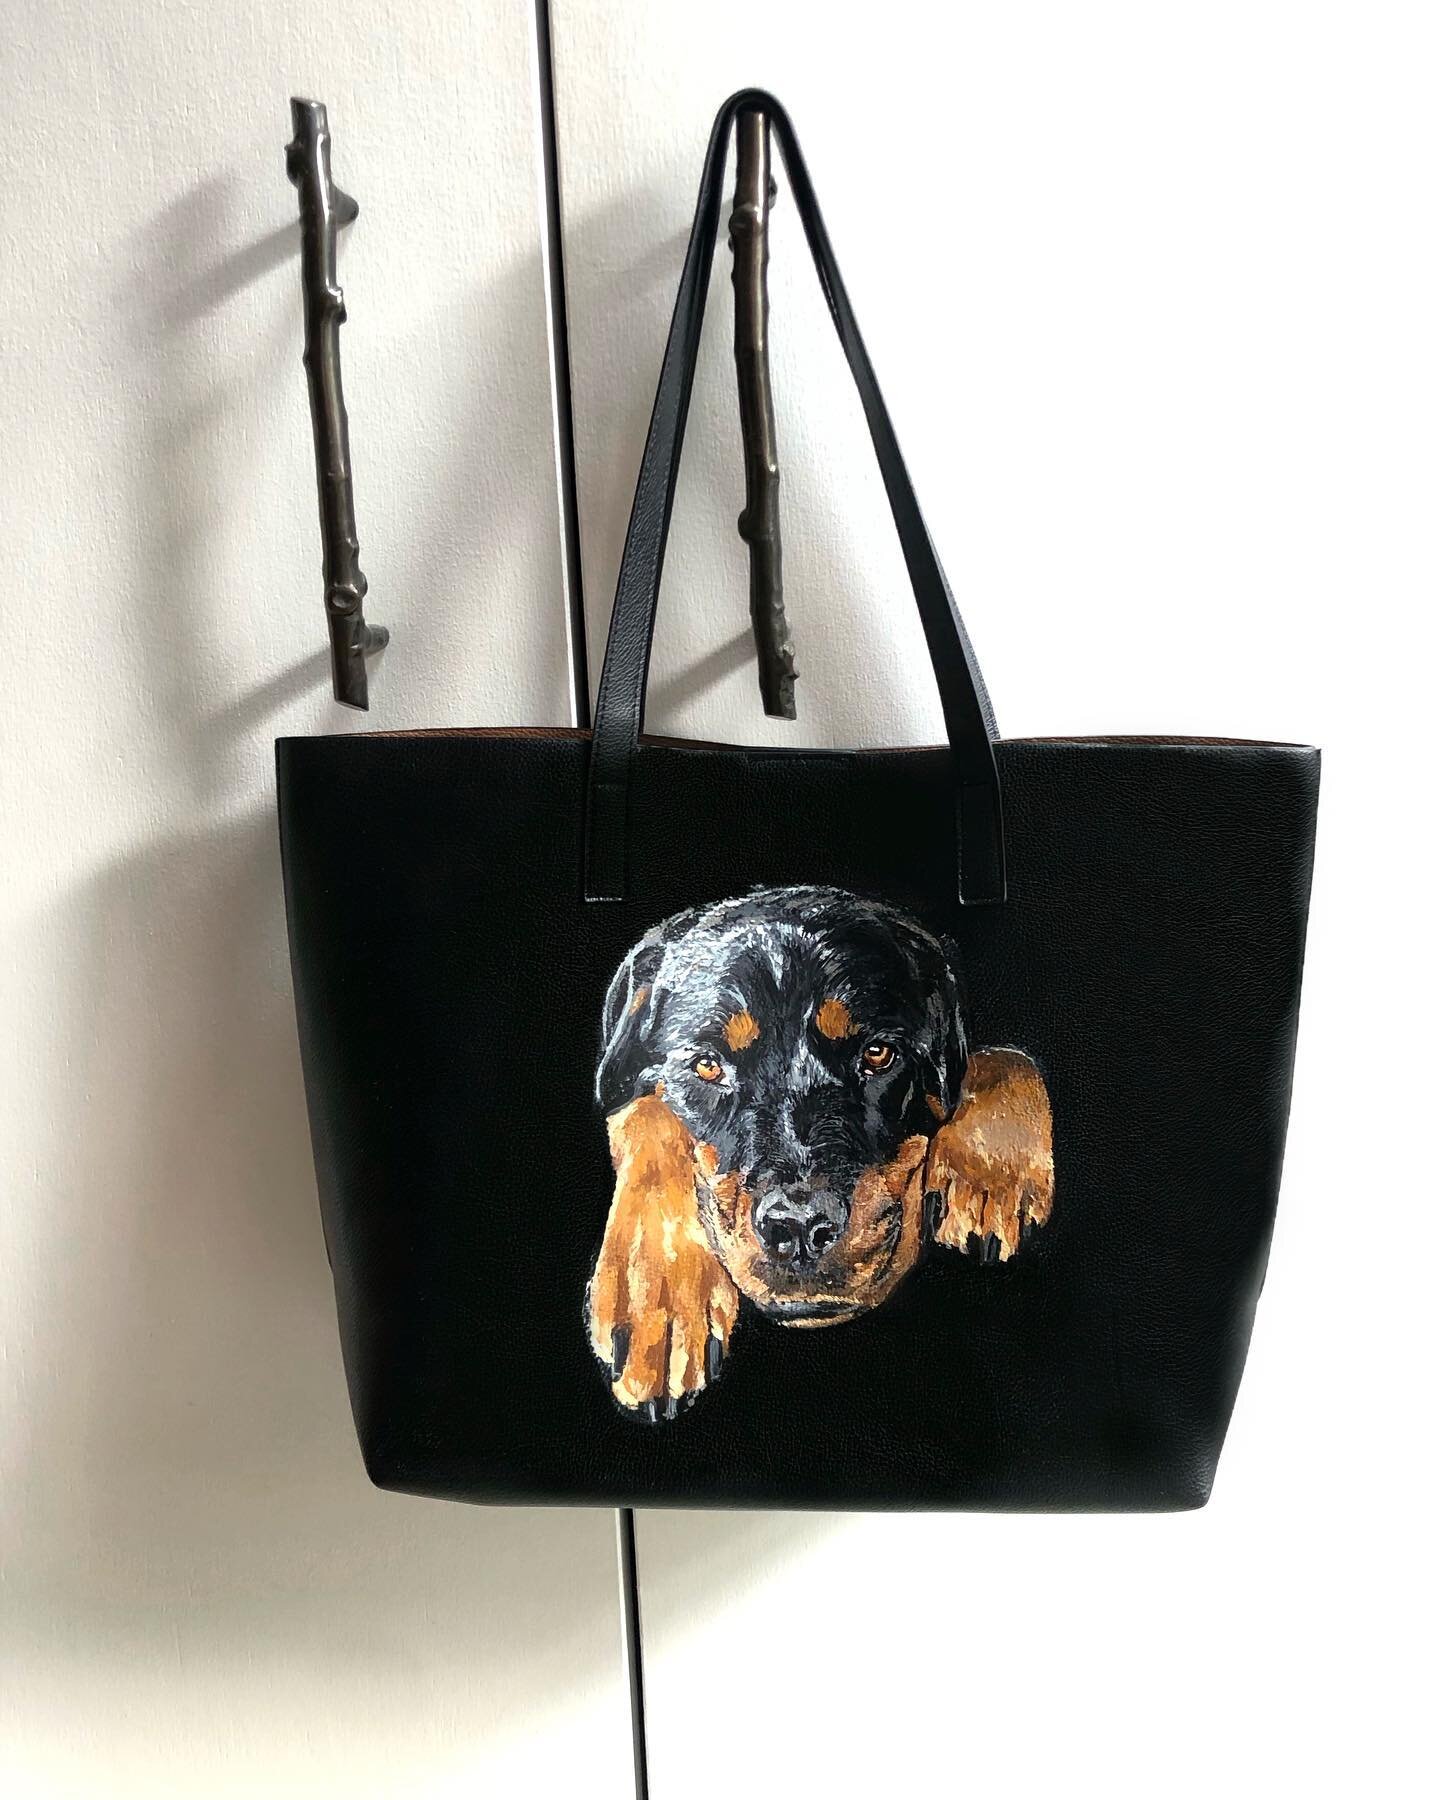 One-of-a-kind #P&ecirc;t&agrave;Portrait 

#goldendudeleathers #dogsofinstagram #custom #handpainted #veganleather #madeinnyc #doglover #nyc #sustainableart #personalization #dogmom